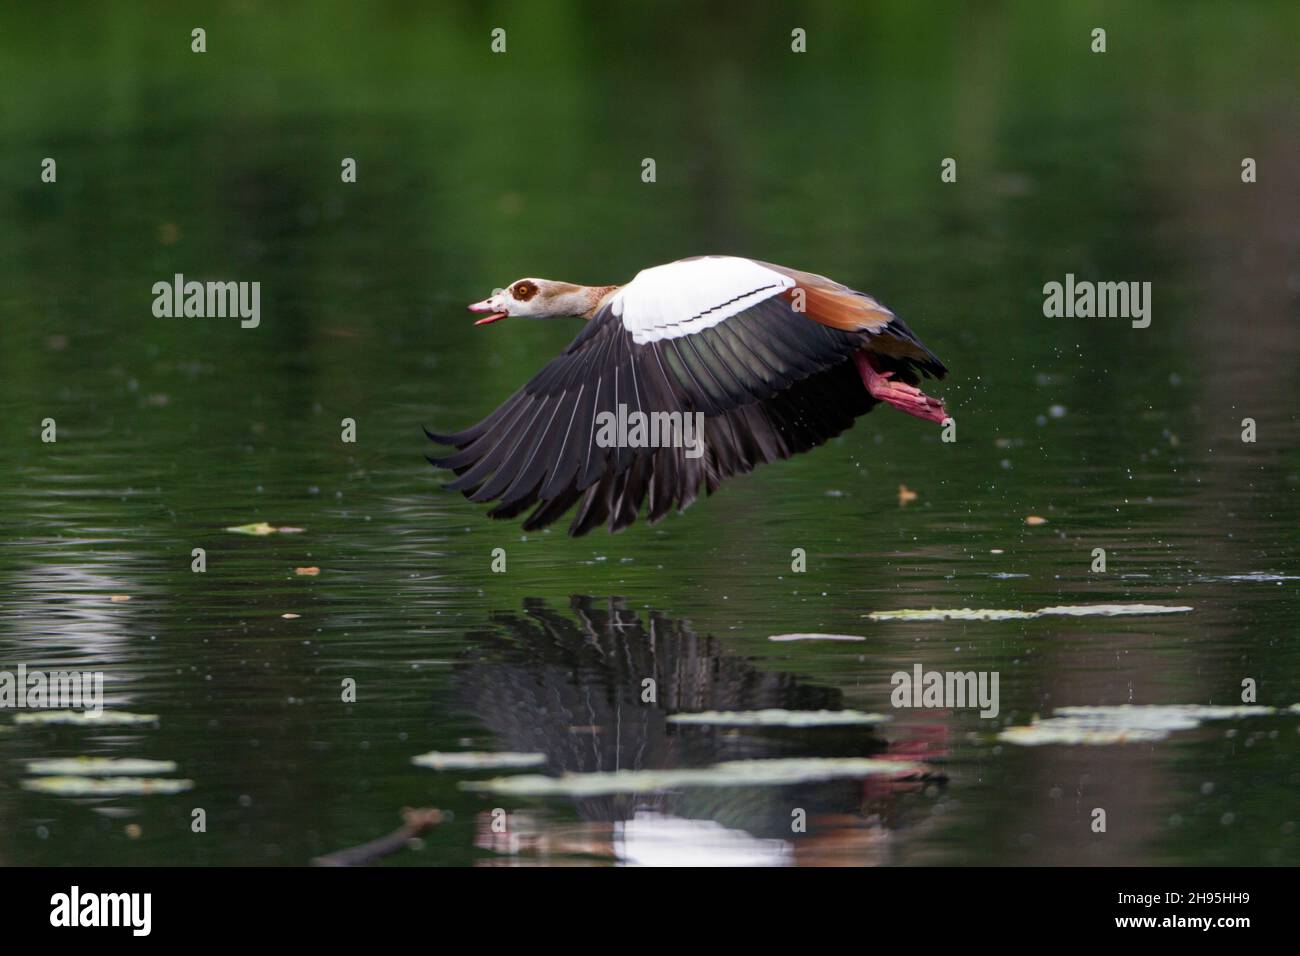 Egyptian Goose (Alopochen aegyptiaca), in flight, taking off from lake, Lower Saxony, Germany Stock Photo